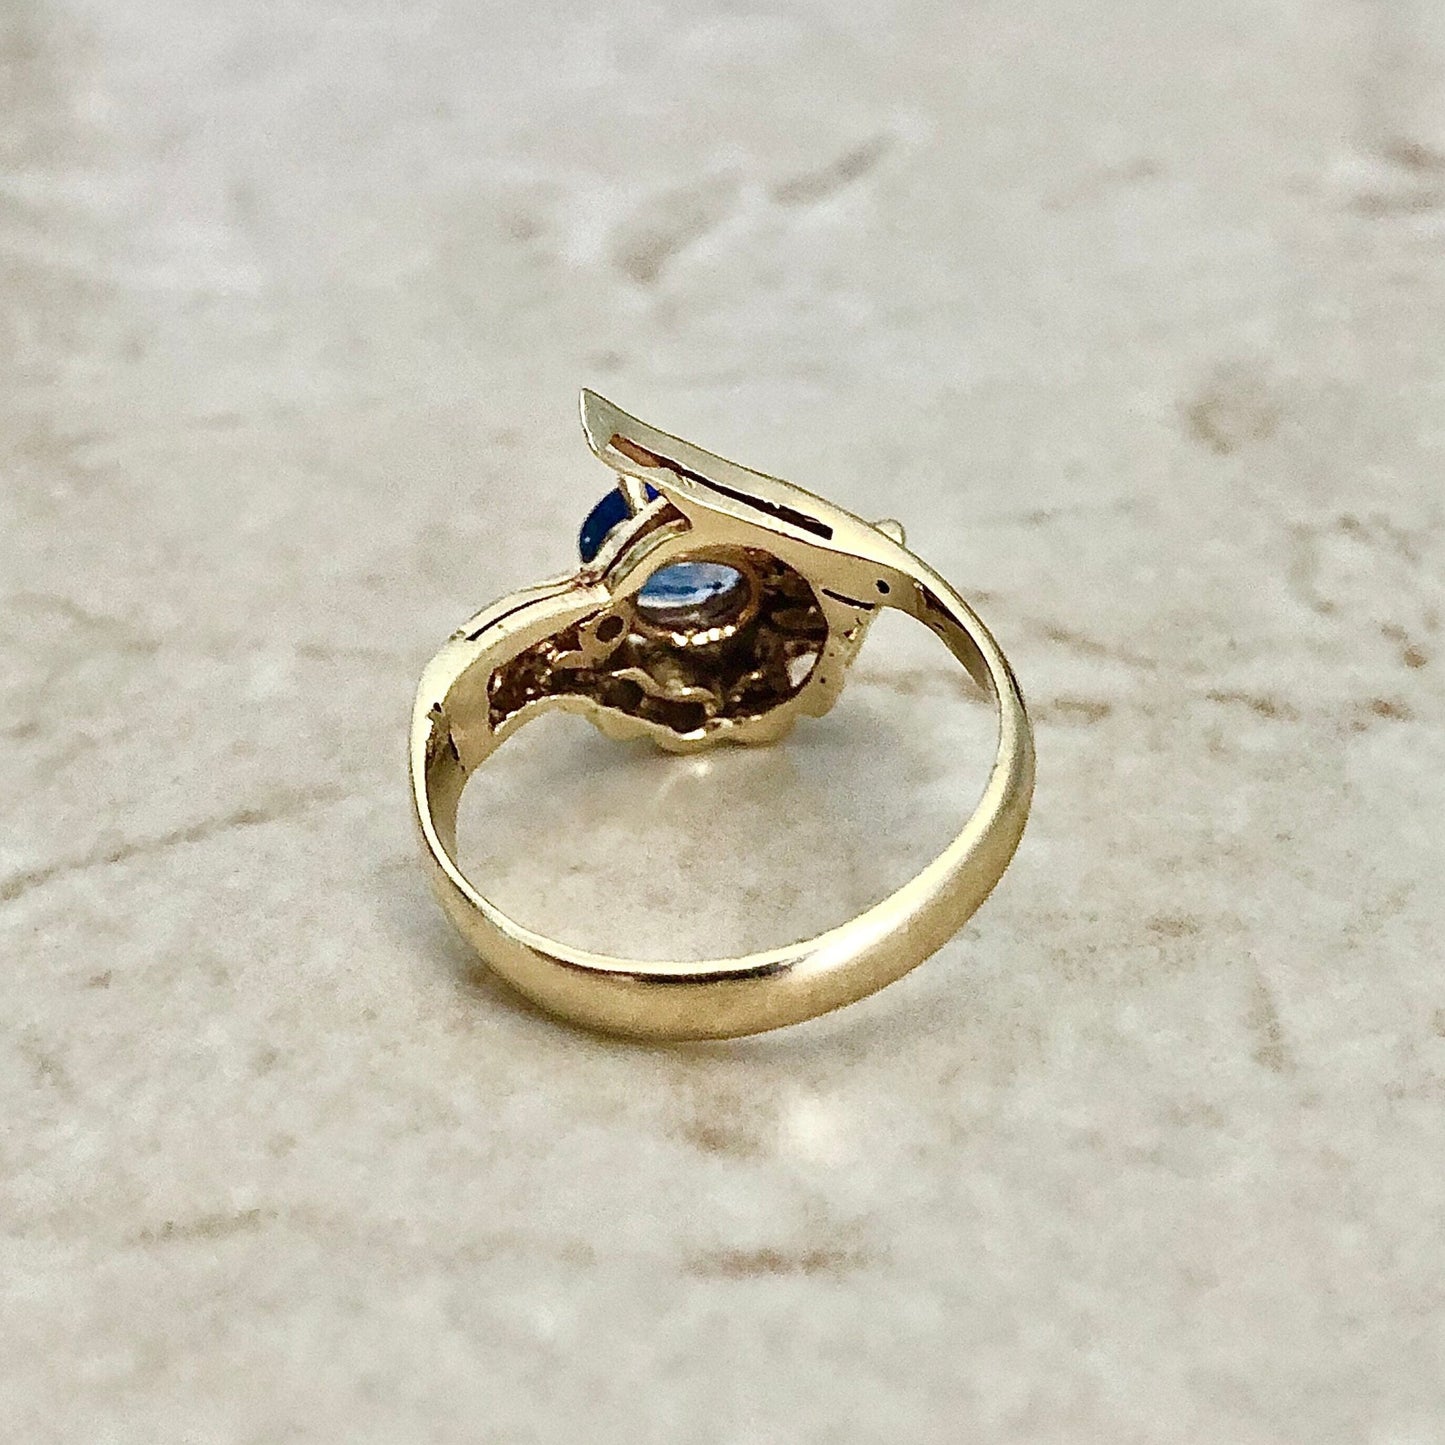 Fine Vintage 14K Sapphire Ring - Cocktail Ring - Engagement Ring - Sapphire Ring - Size 6.75 - Birthday Gift For Her - Holiday Gift